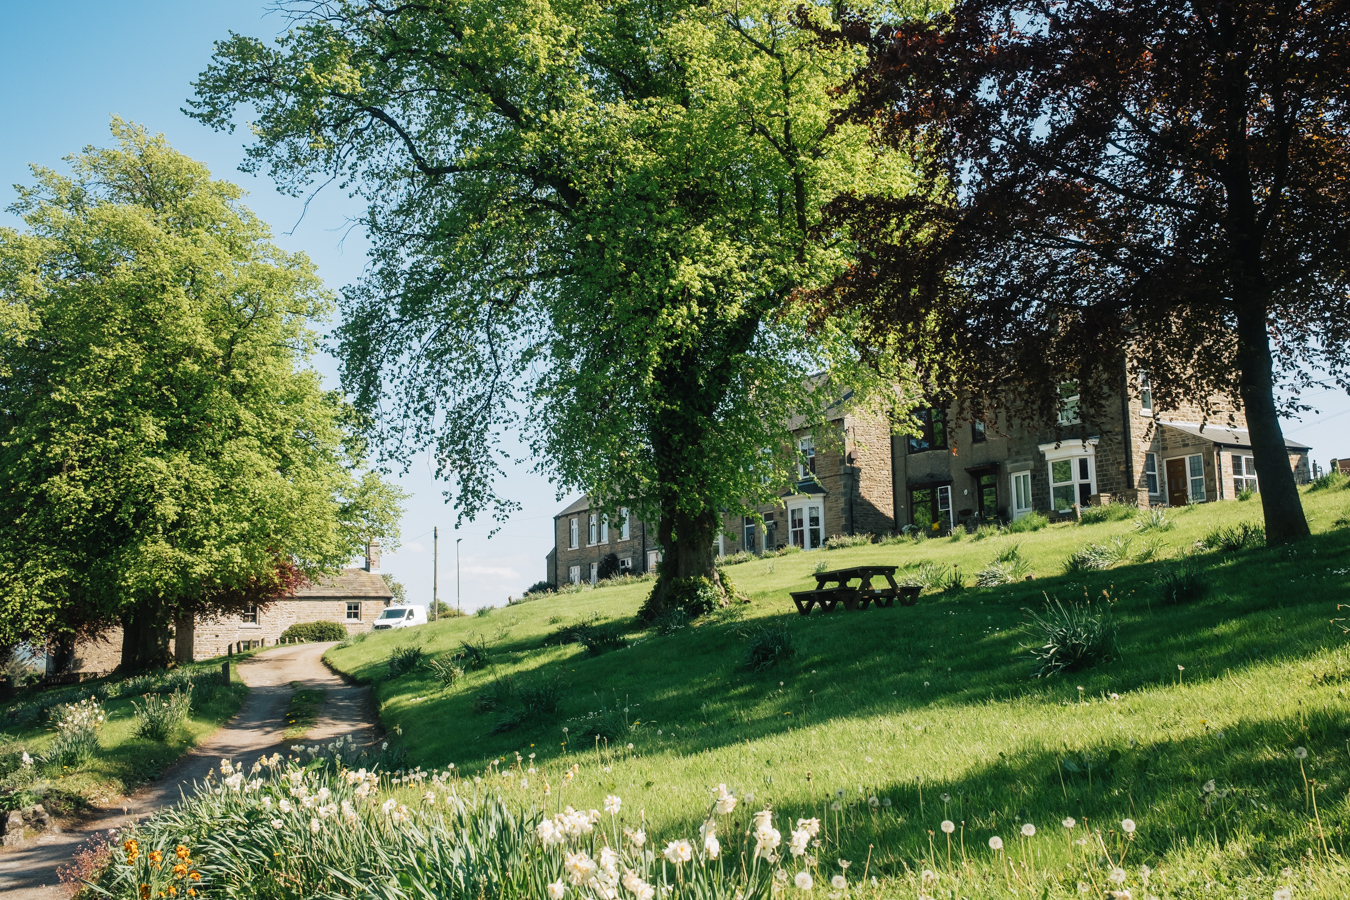 Photograph of Middleton-in-Teesdale by Alex Nichol